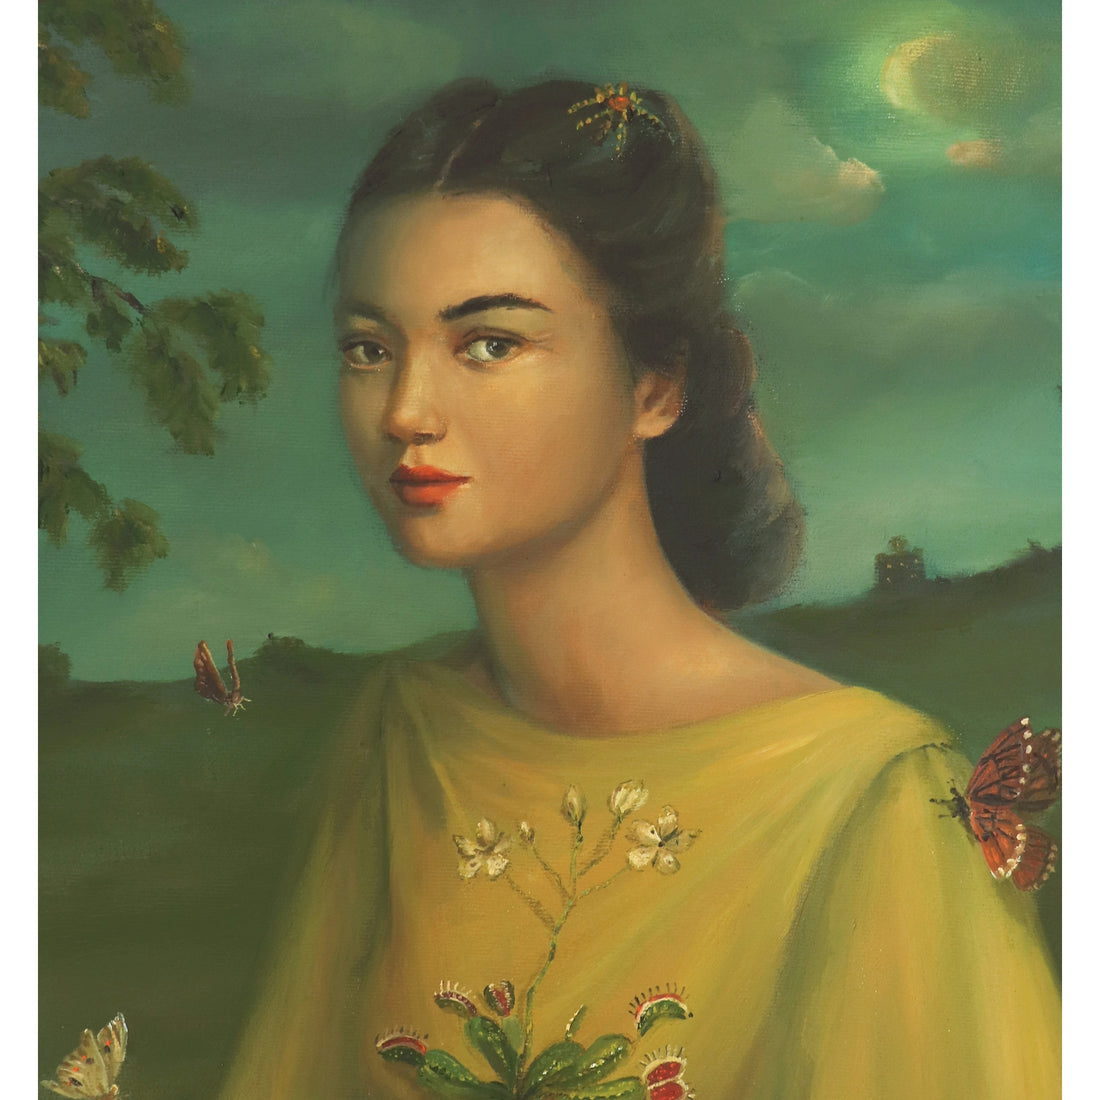 A portrait of a woman in a yellow dress with butterfly motifs, created by Canadian fine artist Janet Hill, set against a pastoral landscape with trees and a distant structure featuring the Venus Fly Trap Art Print.